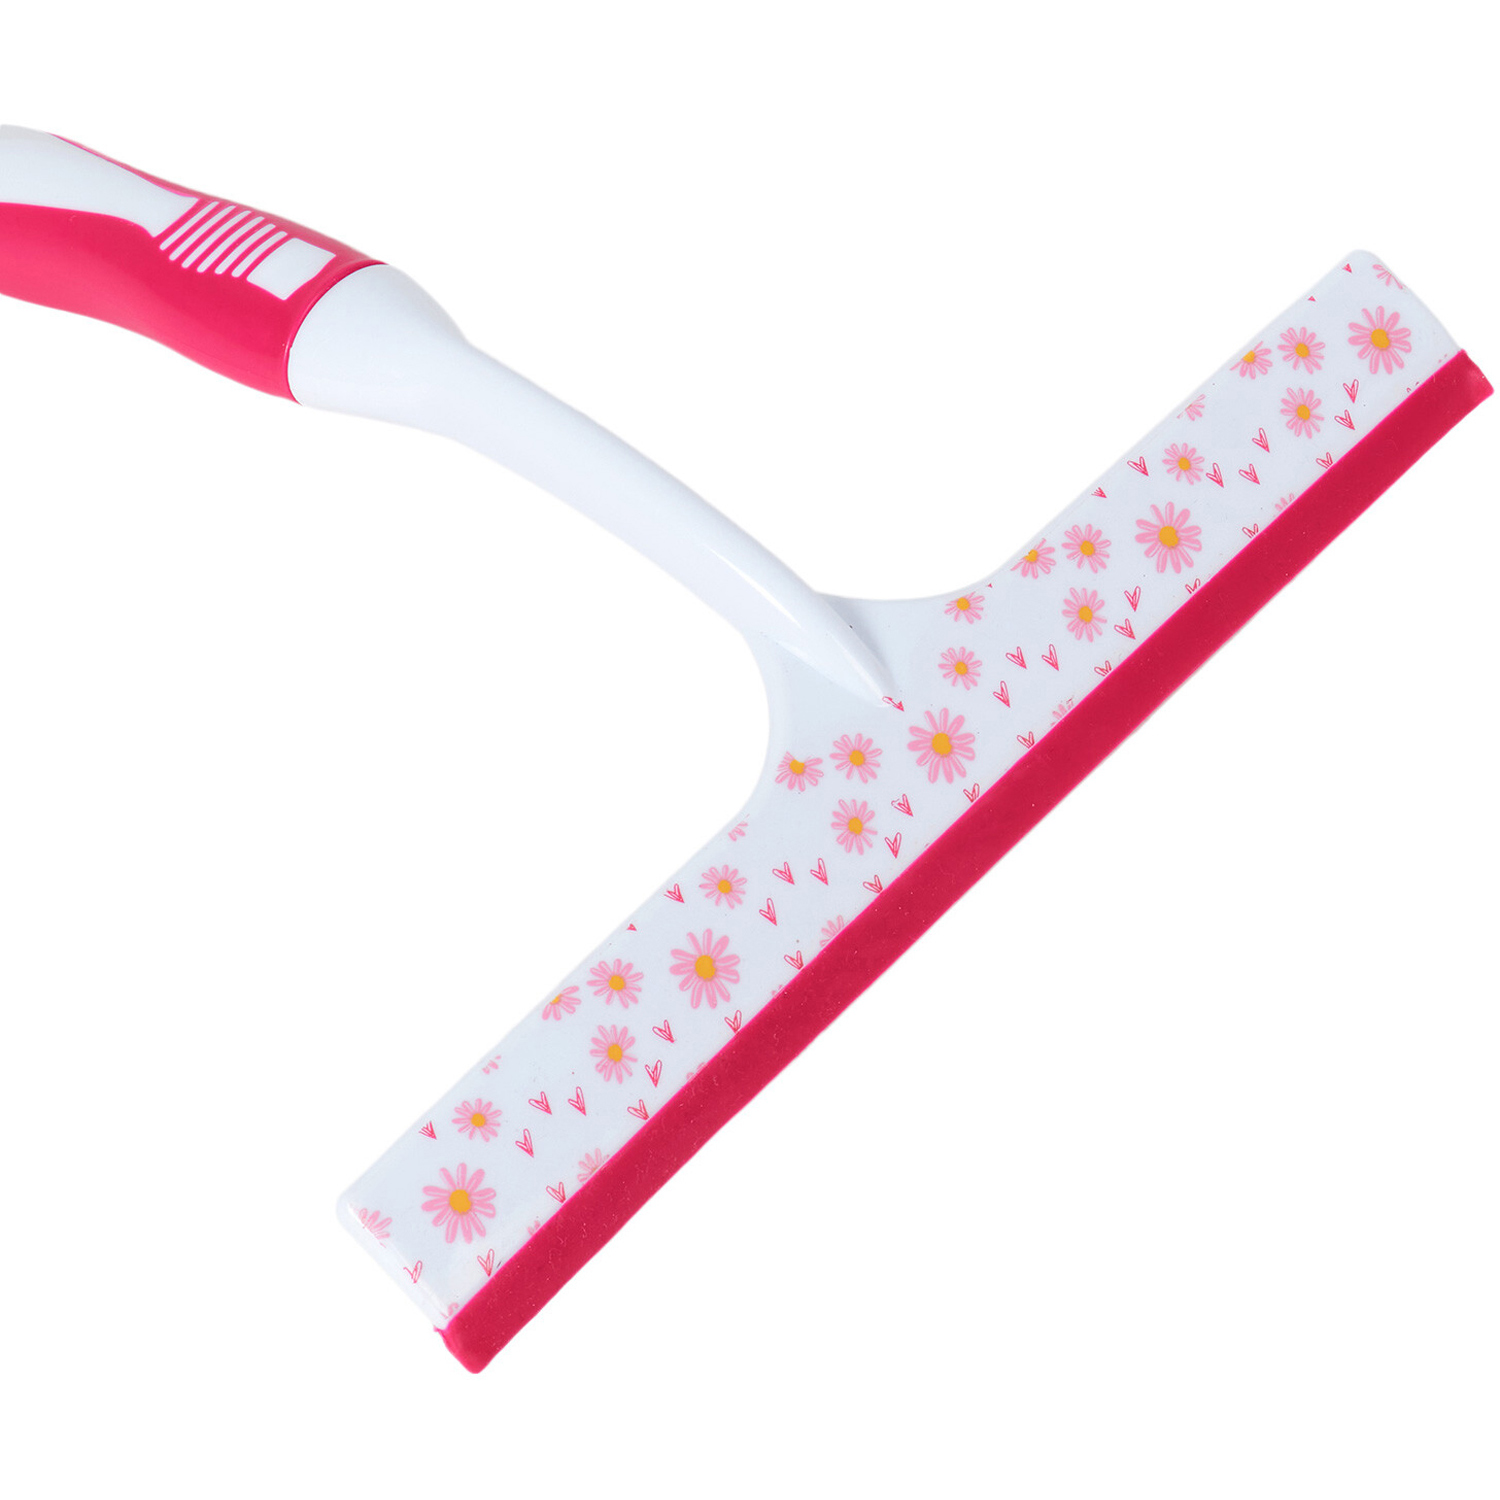 Daisy Pink Squeegee Image 4